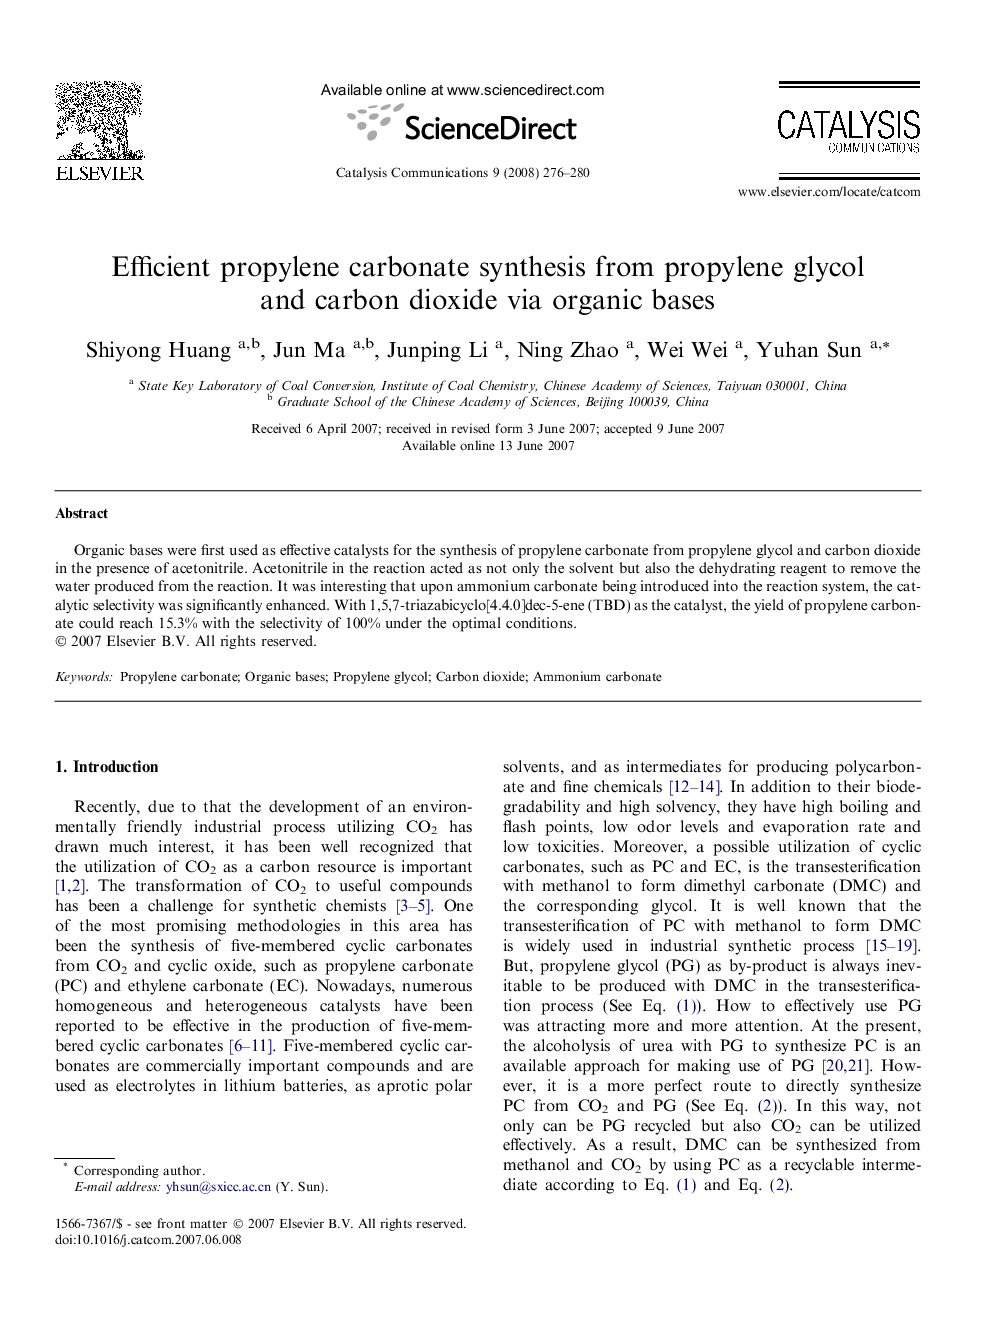 Efficient propylene carbonate synthesis from propylene glycol and carbon dioxide via organic bases